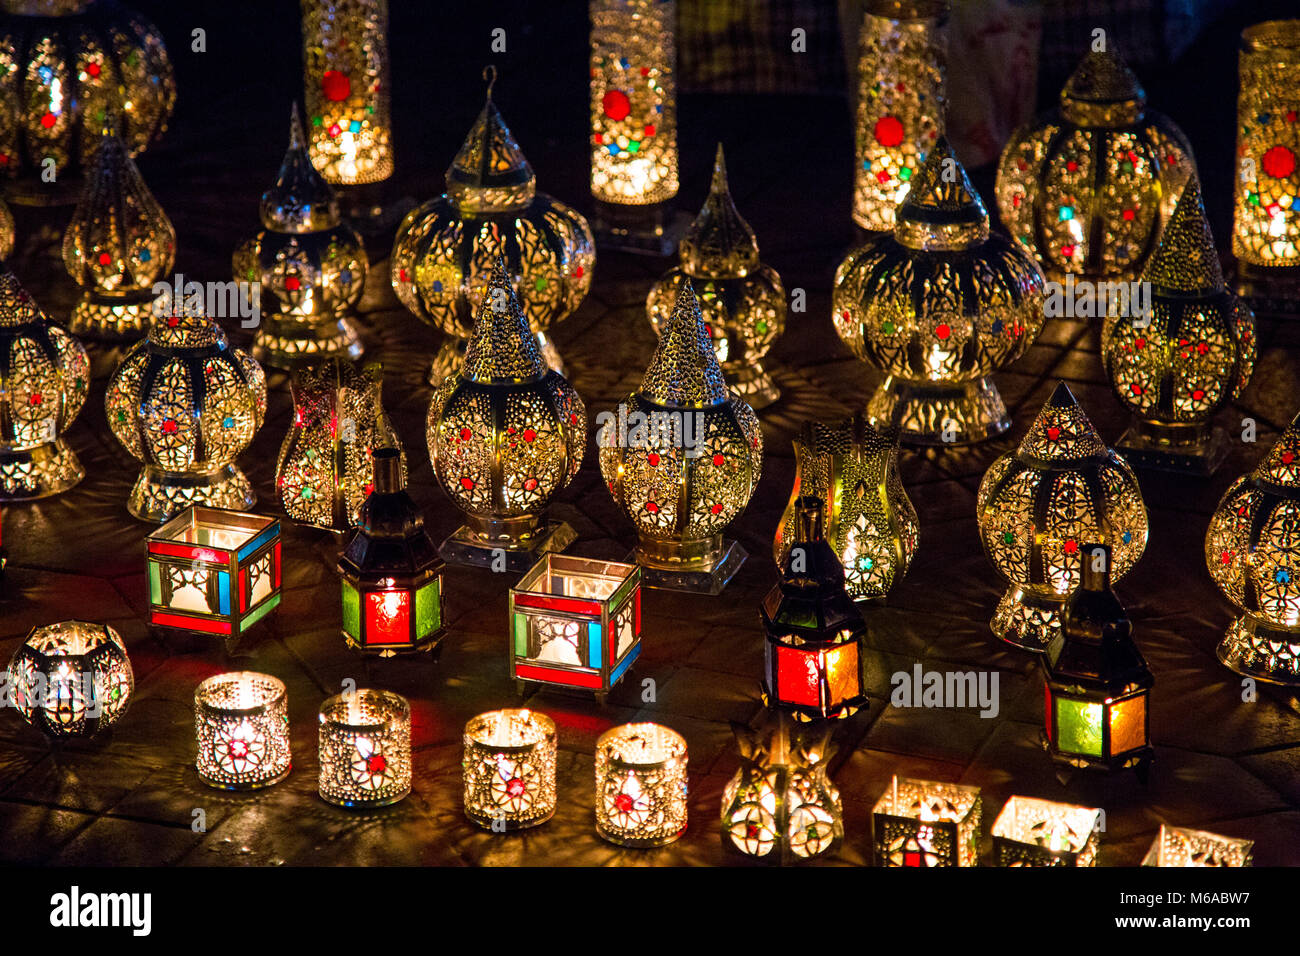 Display of colourful oriental lamps in the market in Marrakesh, Morocco Stock Photo